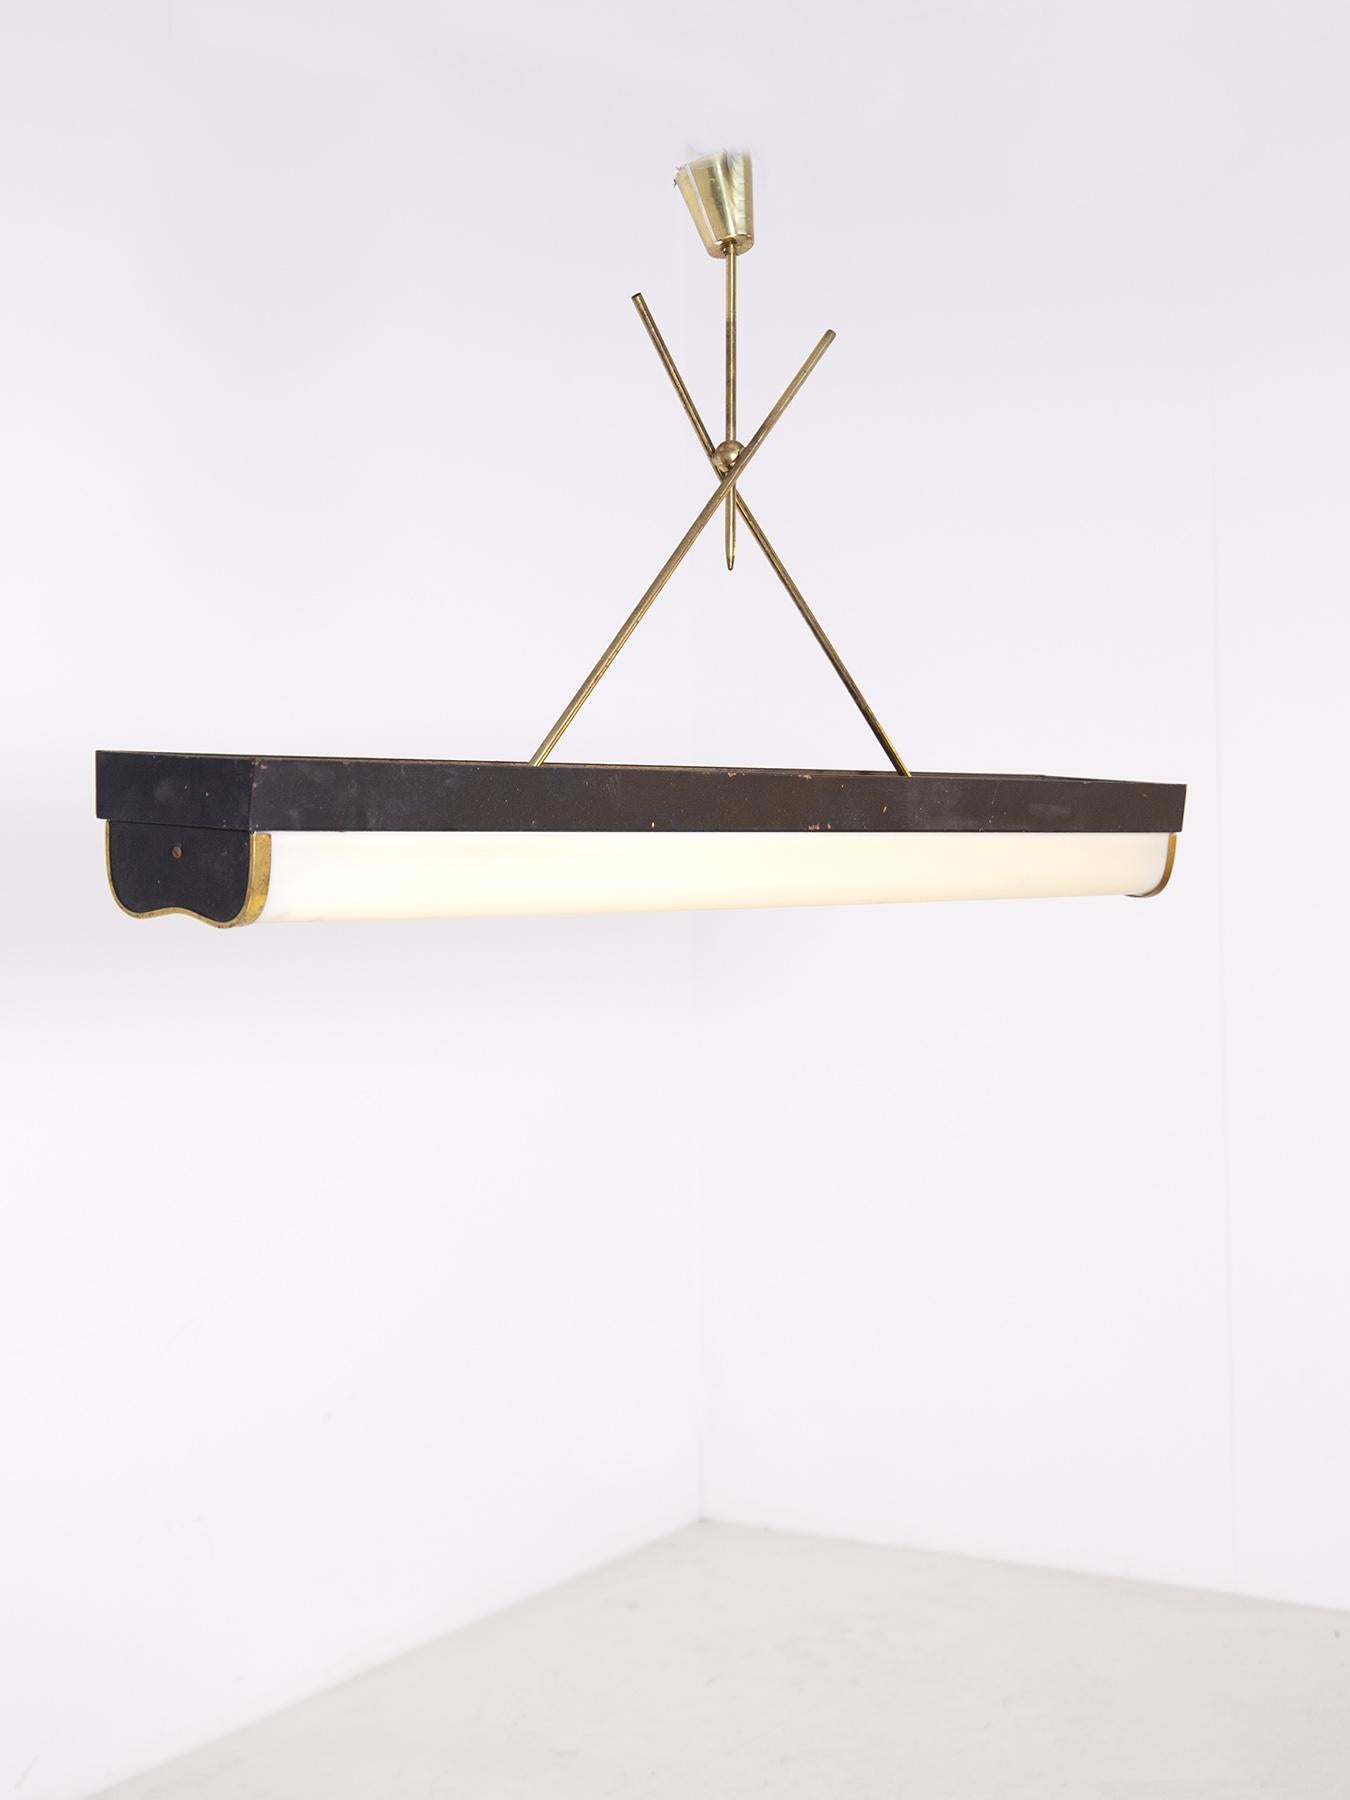 Large hanging lamp by Gino Sarfatti, 1950. Gino Sarfatti's suspension lamp is made with a large rectangular painted aluminium structure. The stem that supports the ceiling light is made of tubular brass, its intersections create an excellent